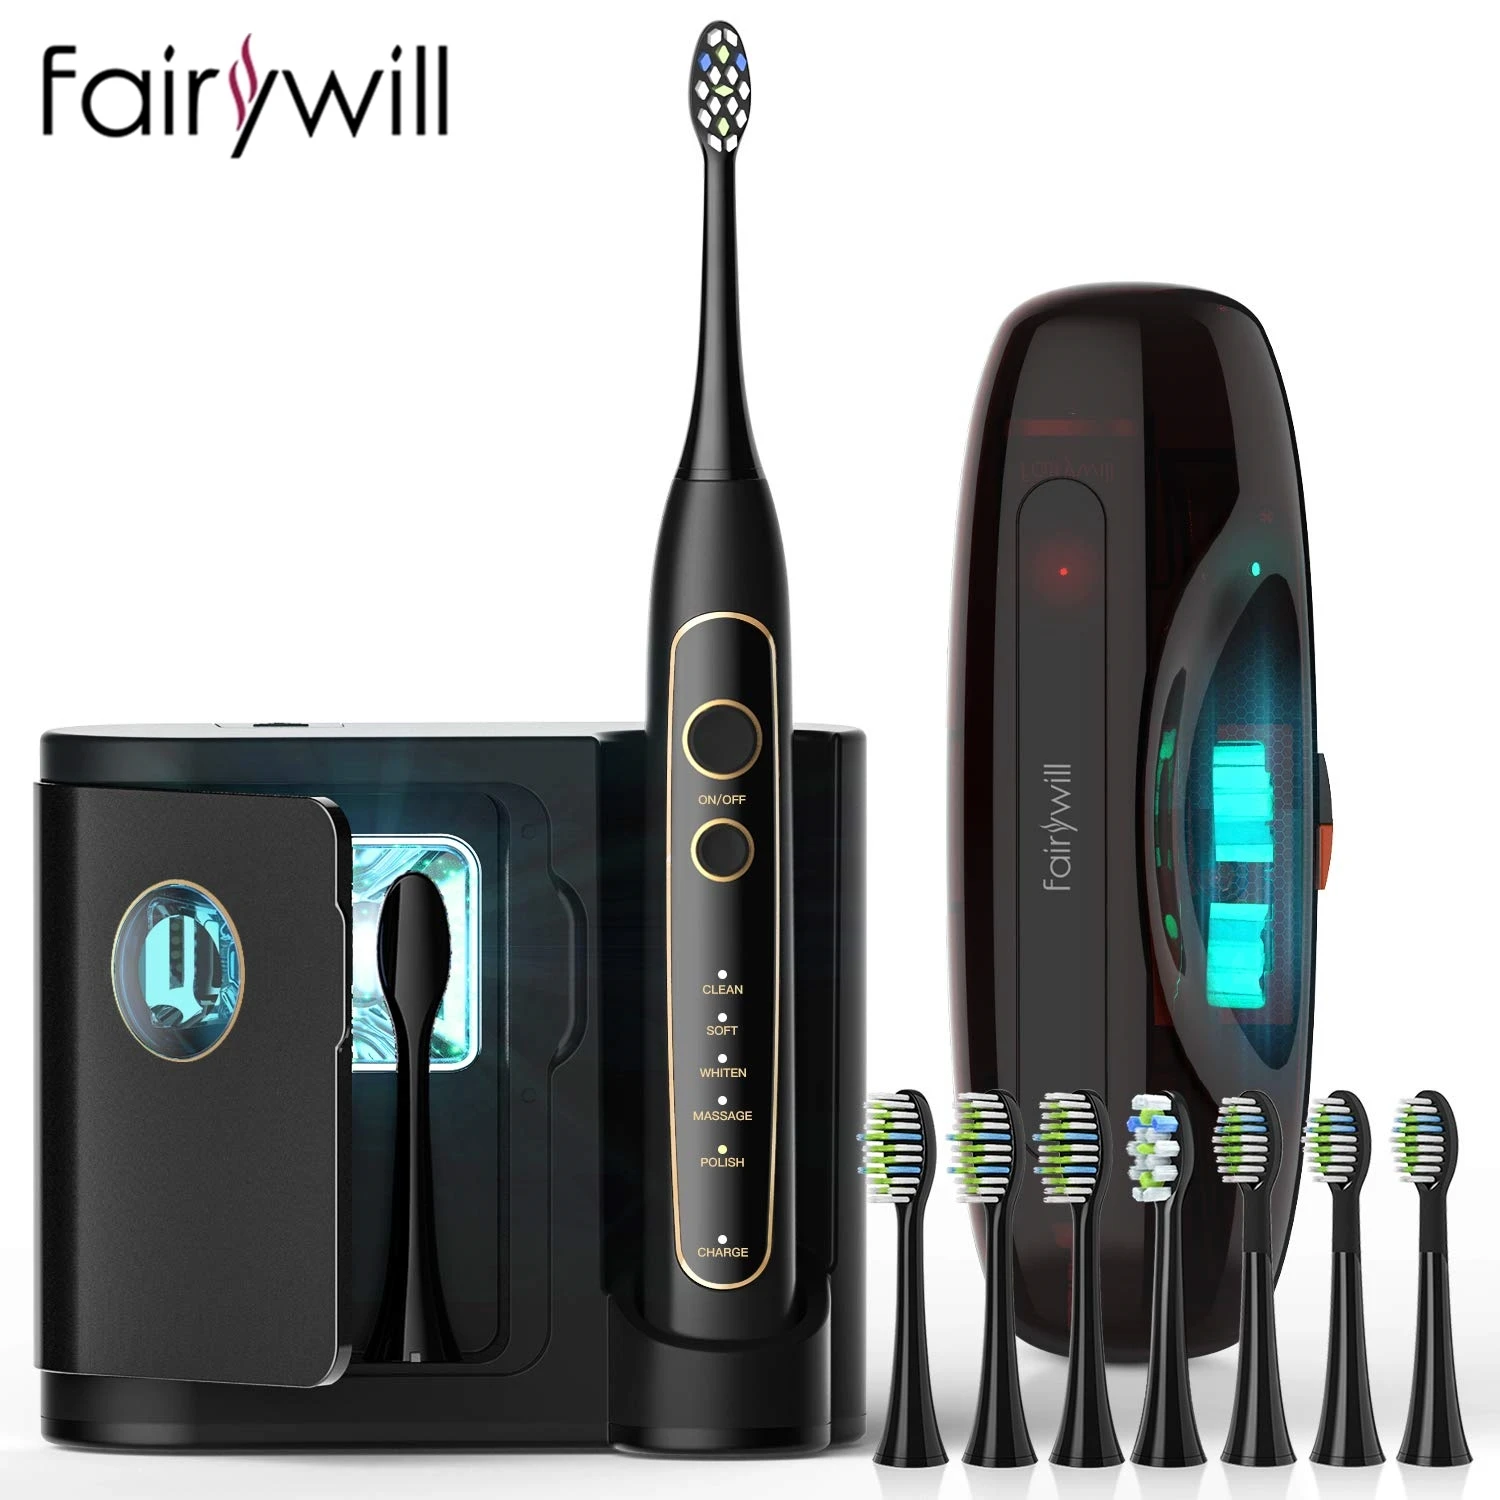 Fairywill Electric Toothbrush Model 2056-US Ultra-Sonic Power Whitening Toothbrush with 5 Modes Wireless Charging Smart Timer